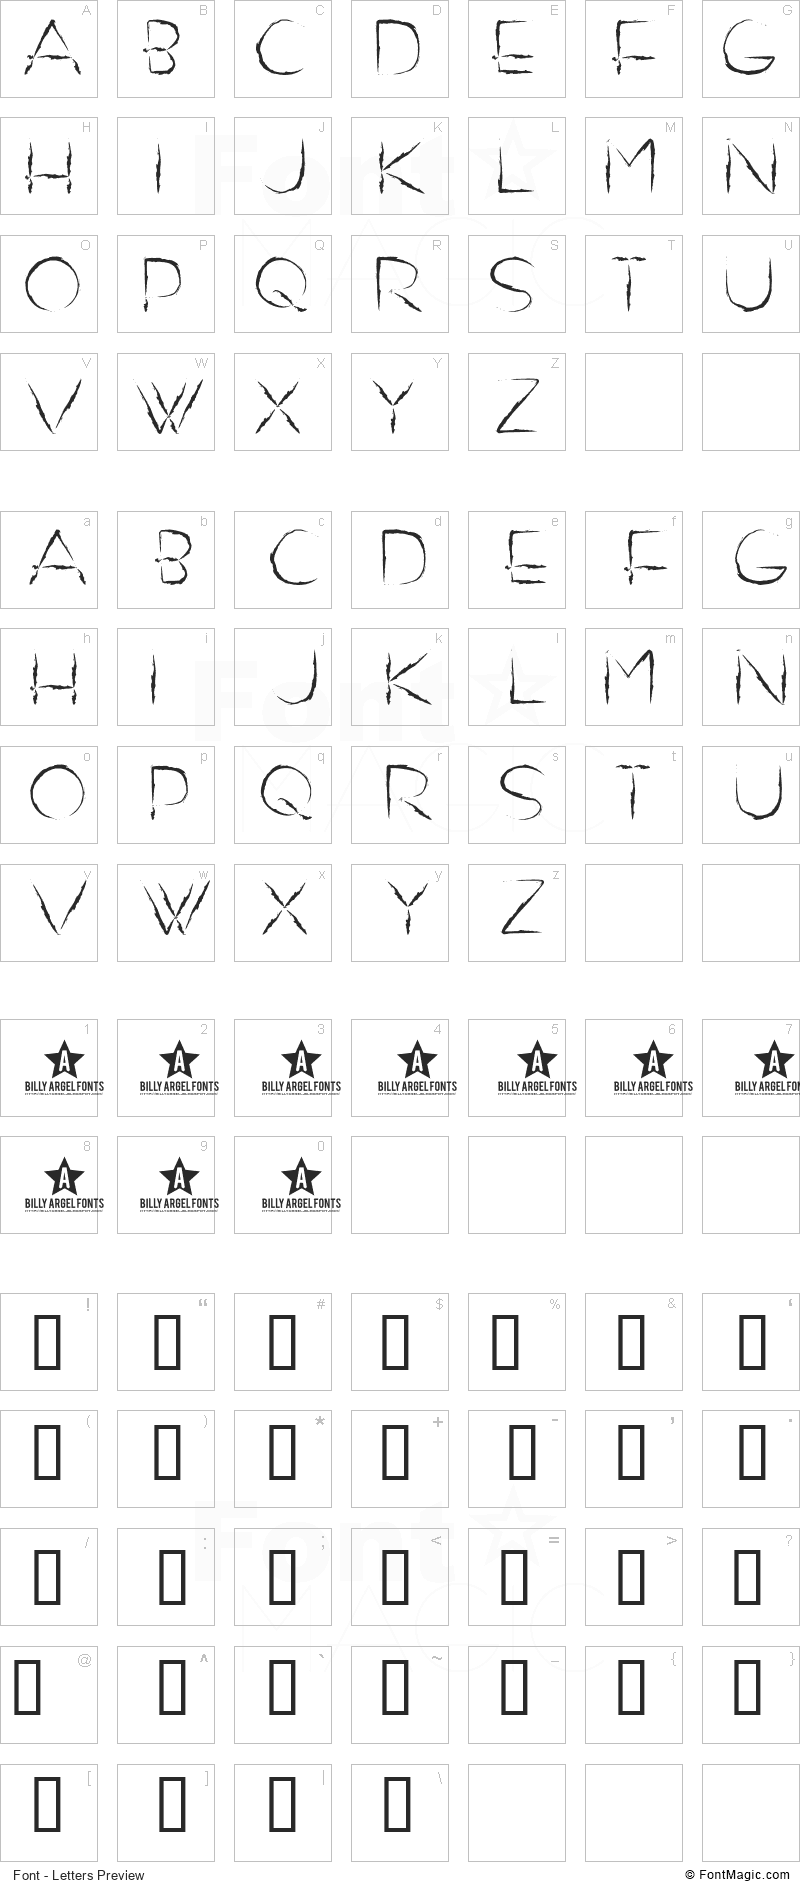 Do Not Exist Font - All Latters Preview Chart